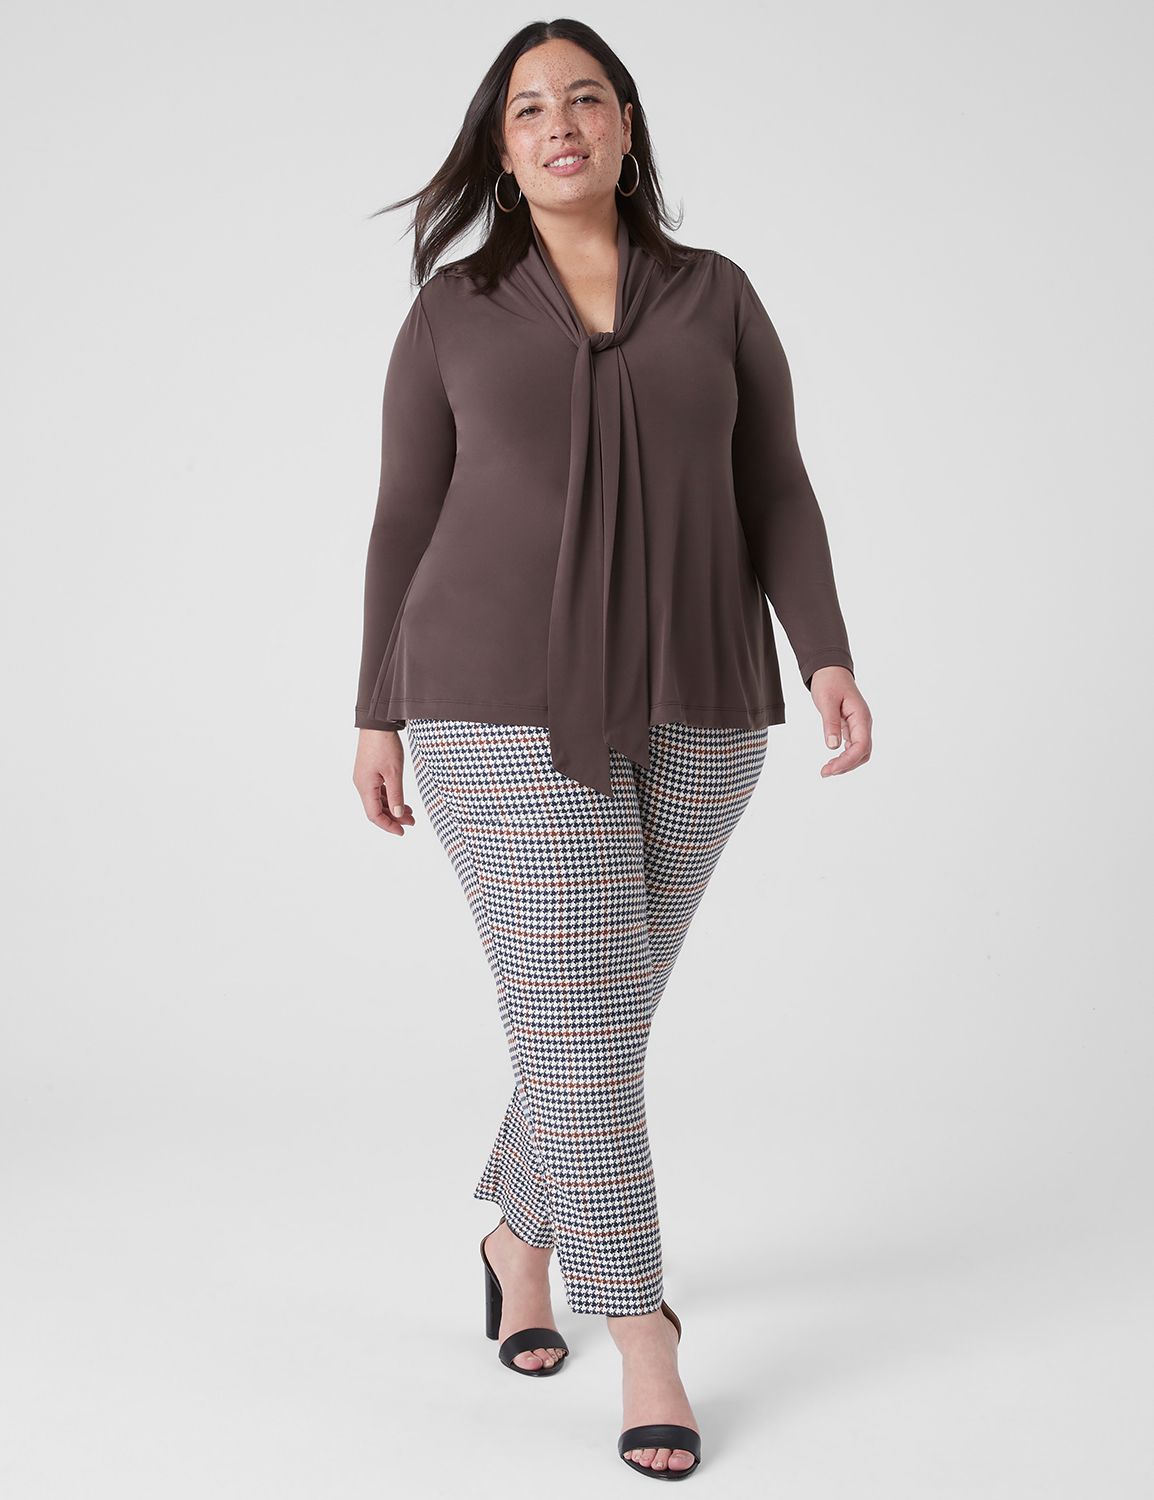 Classic Long Sleeve V Neck With Tie | LaneBryant